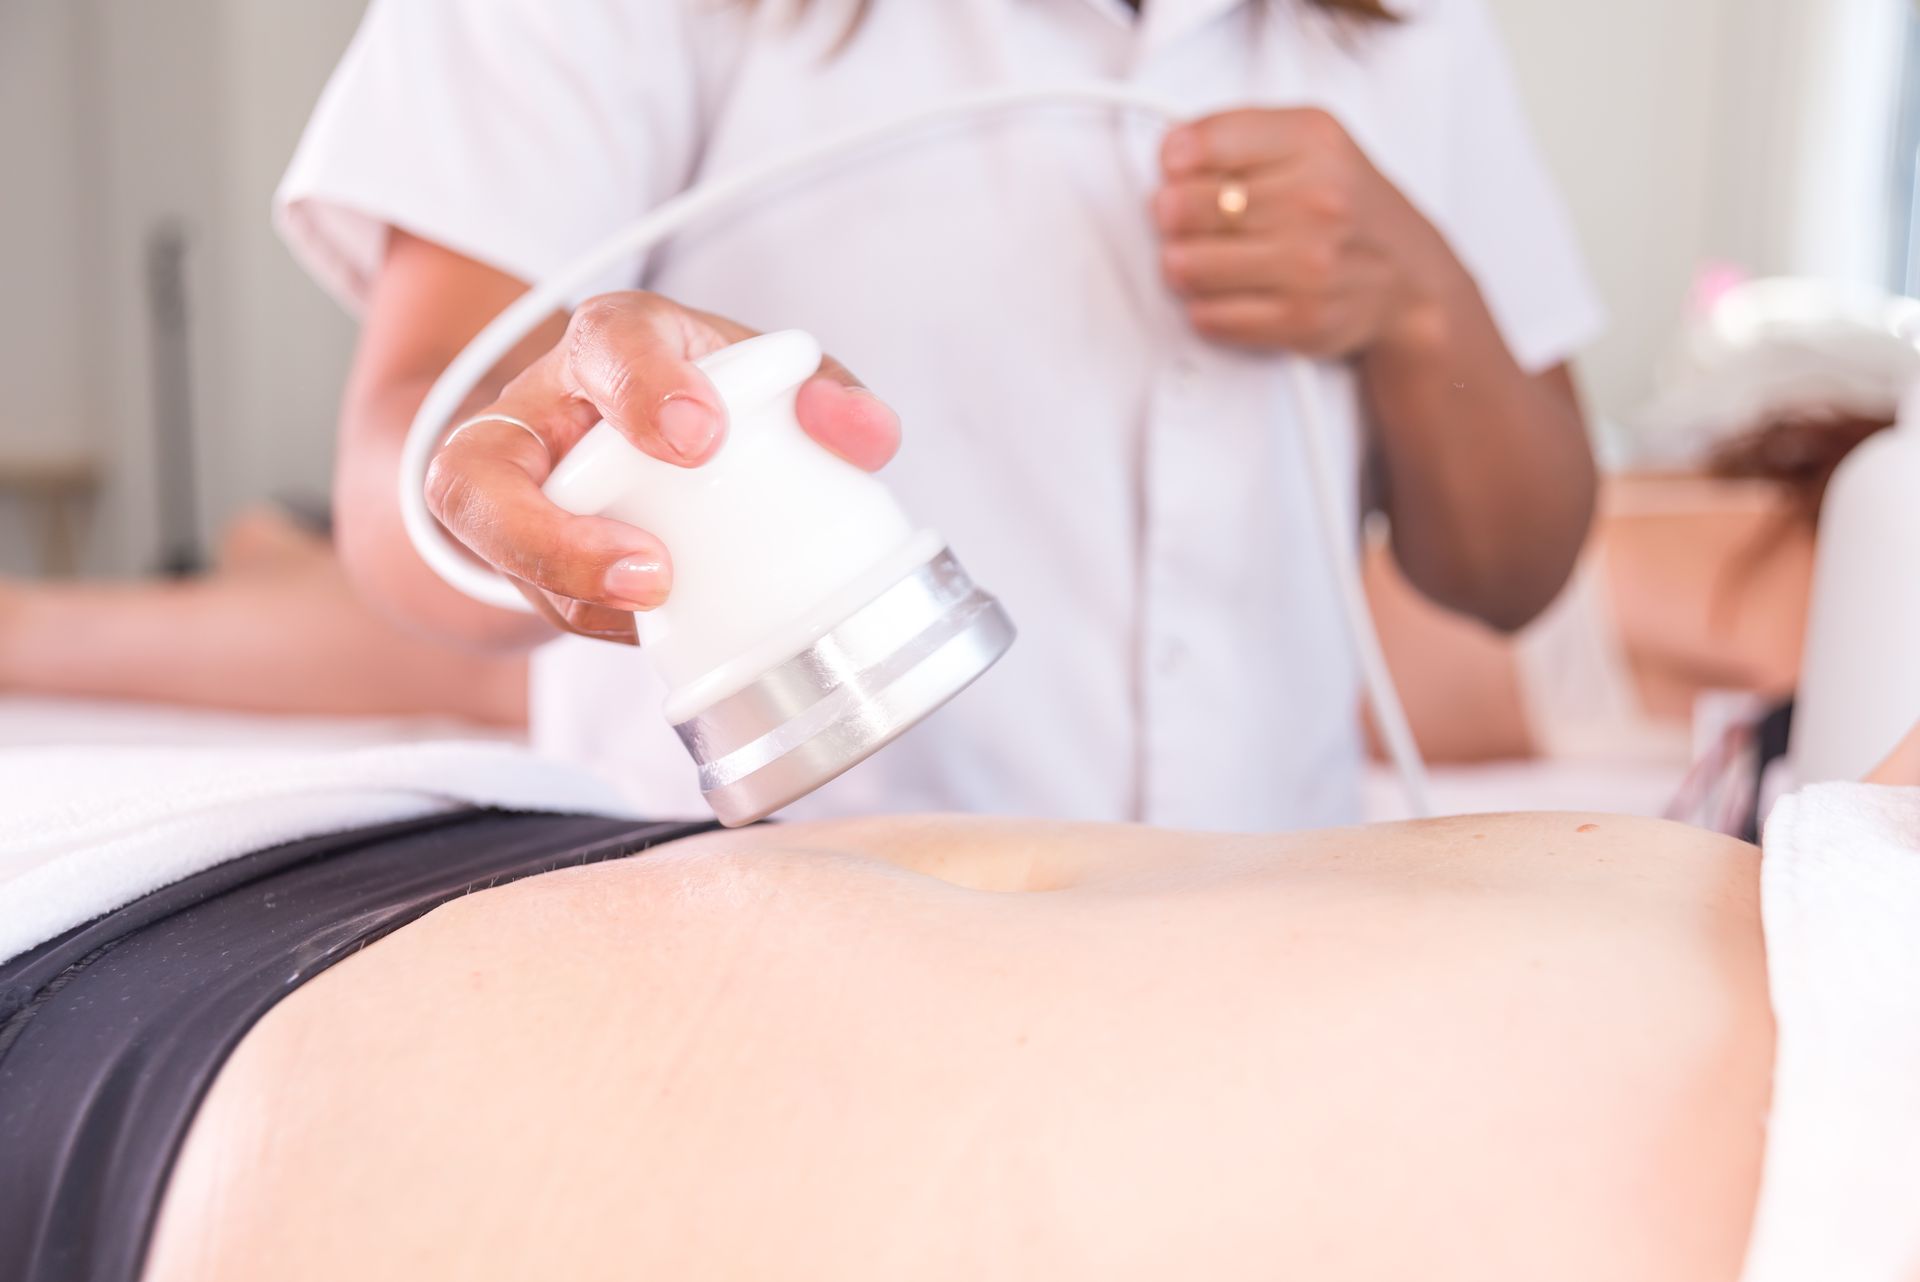 A woman is getting an ultrasound on her back in a spa.